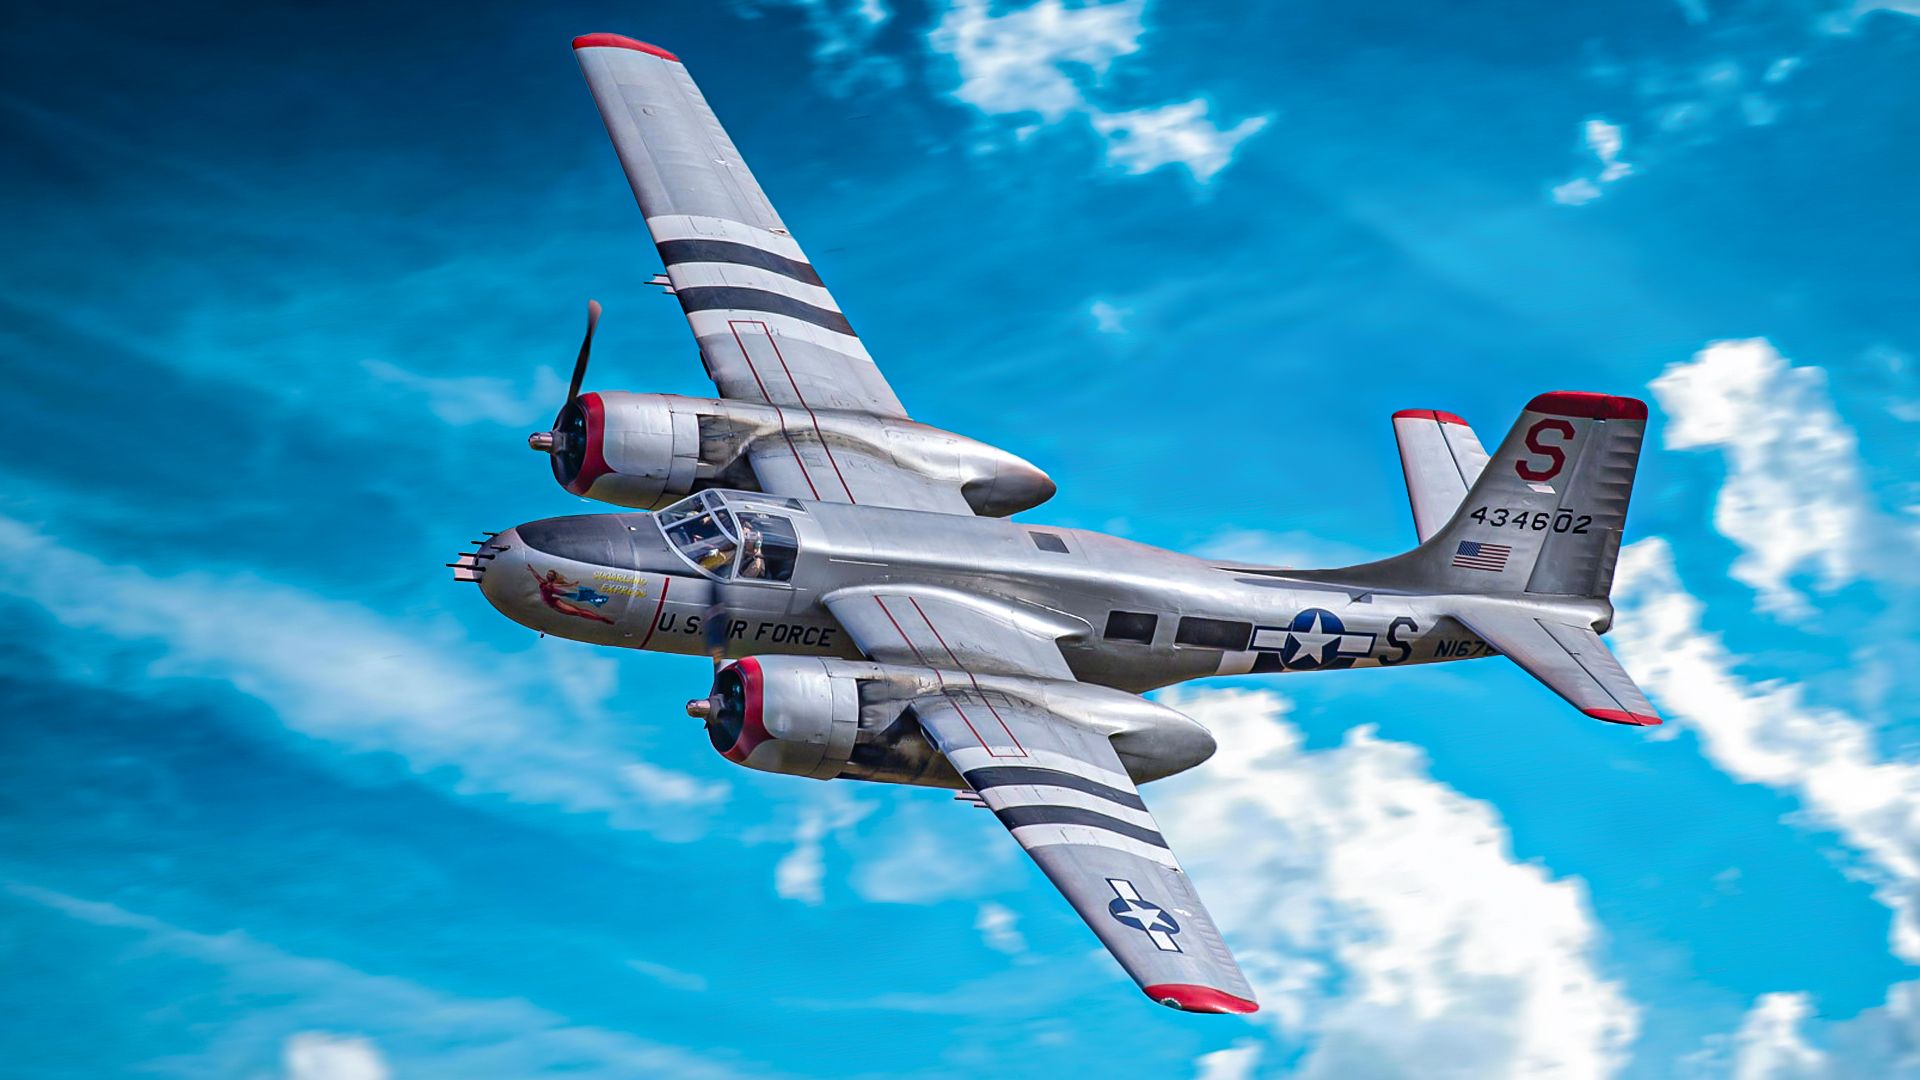 Restoring Aviation History: The A-26 Invader WW2 Bomber